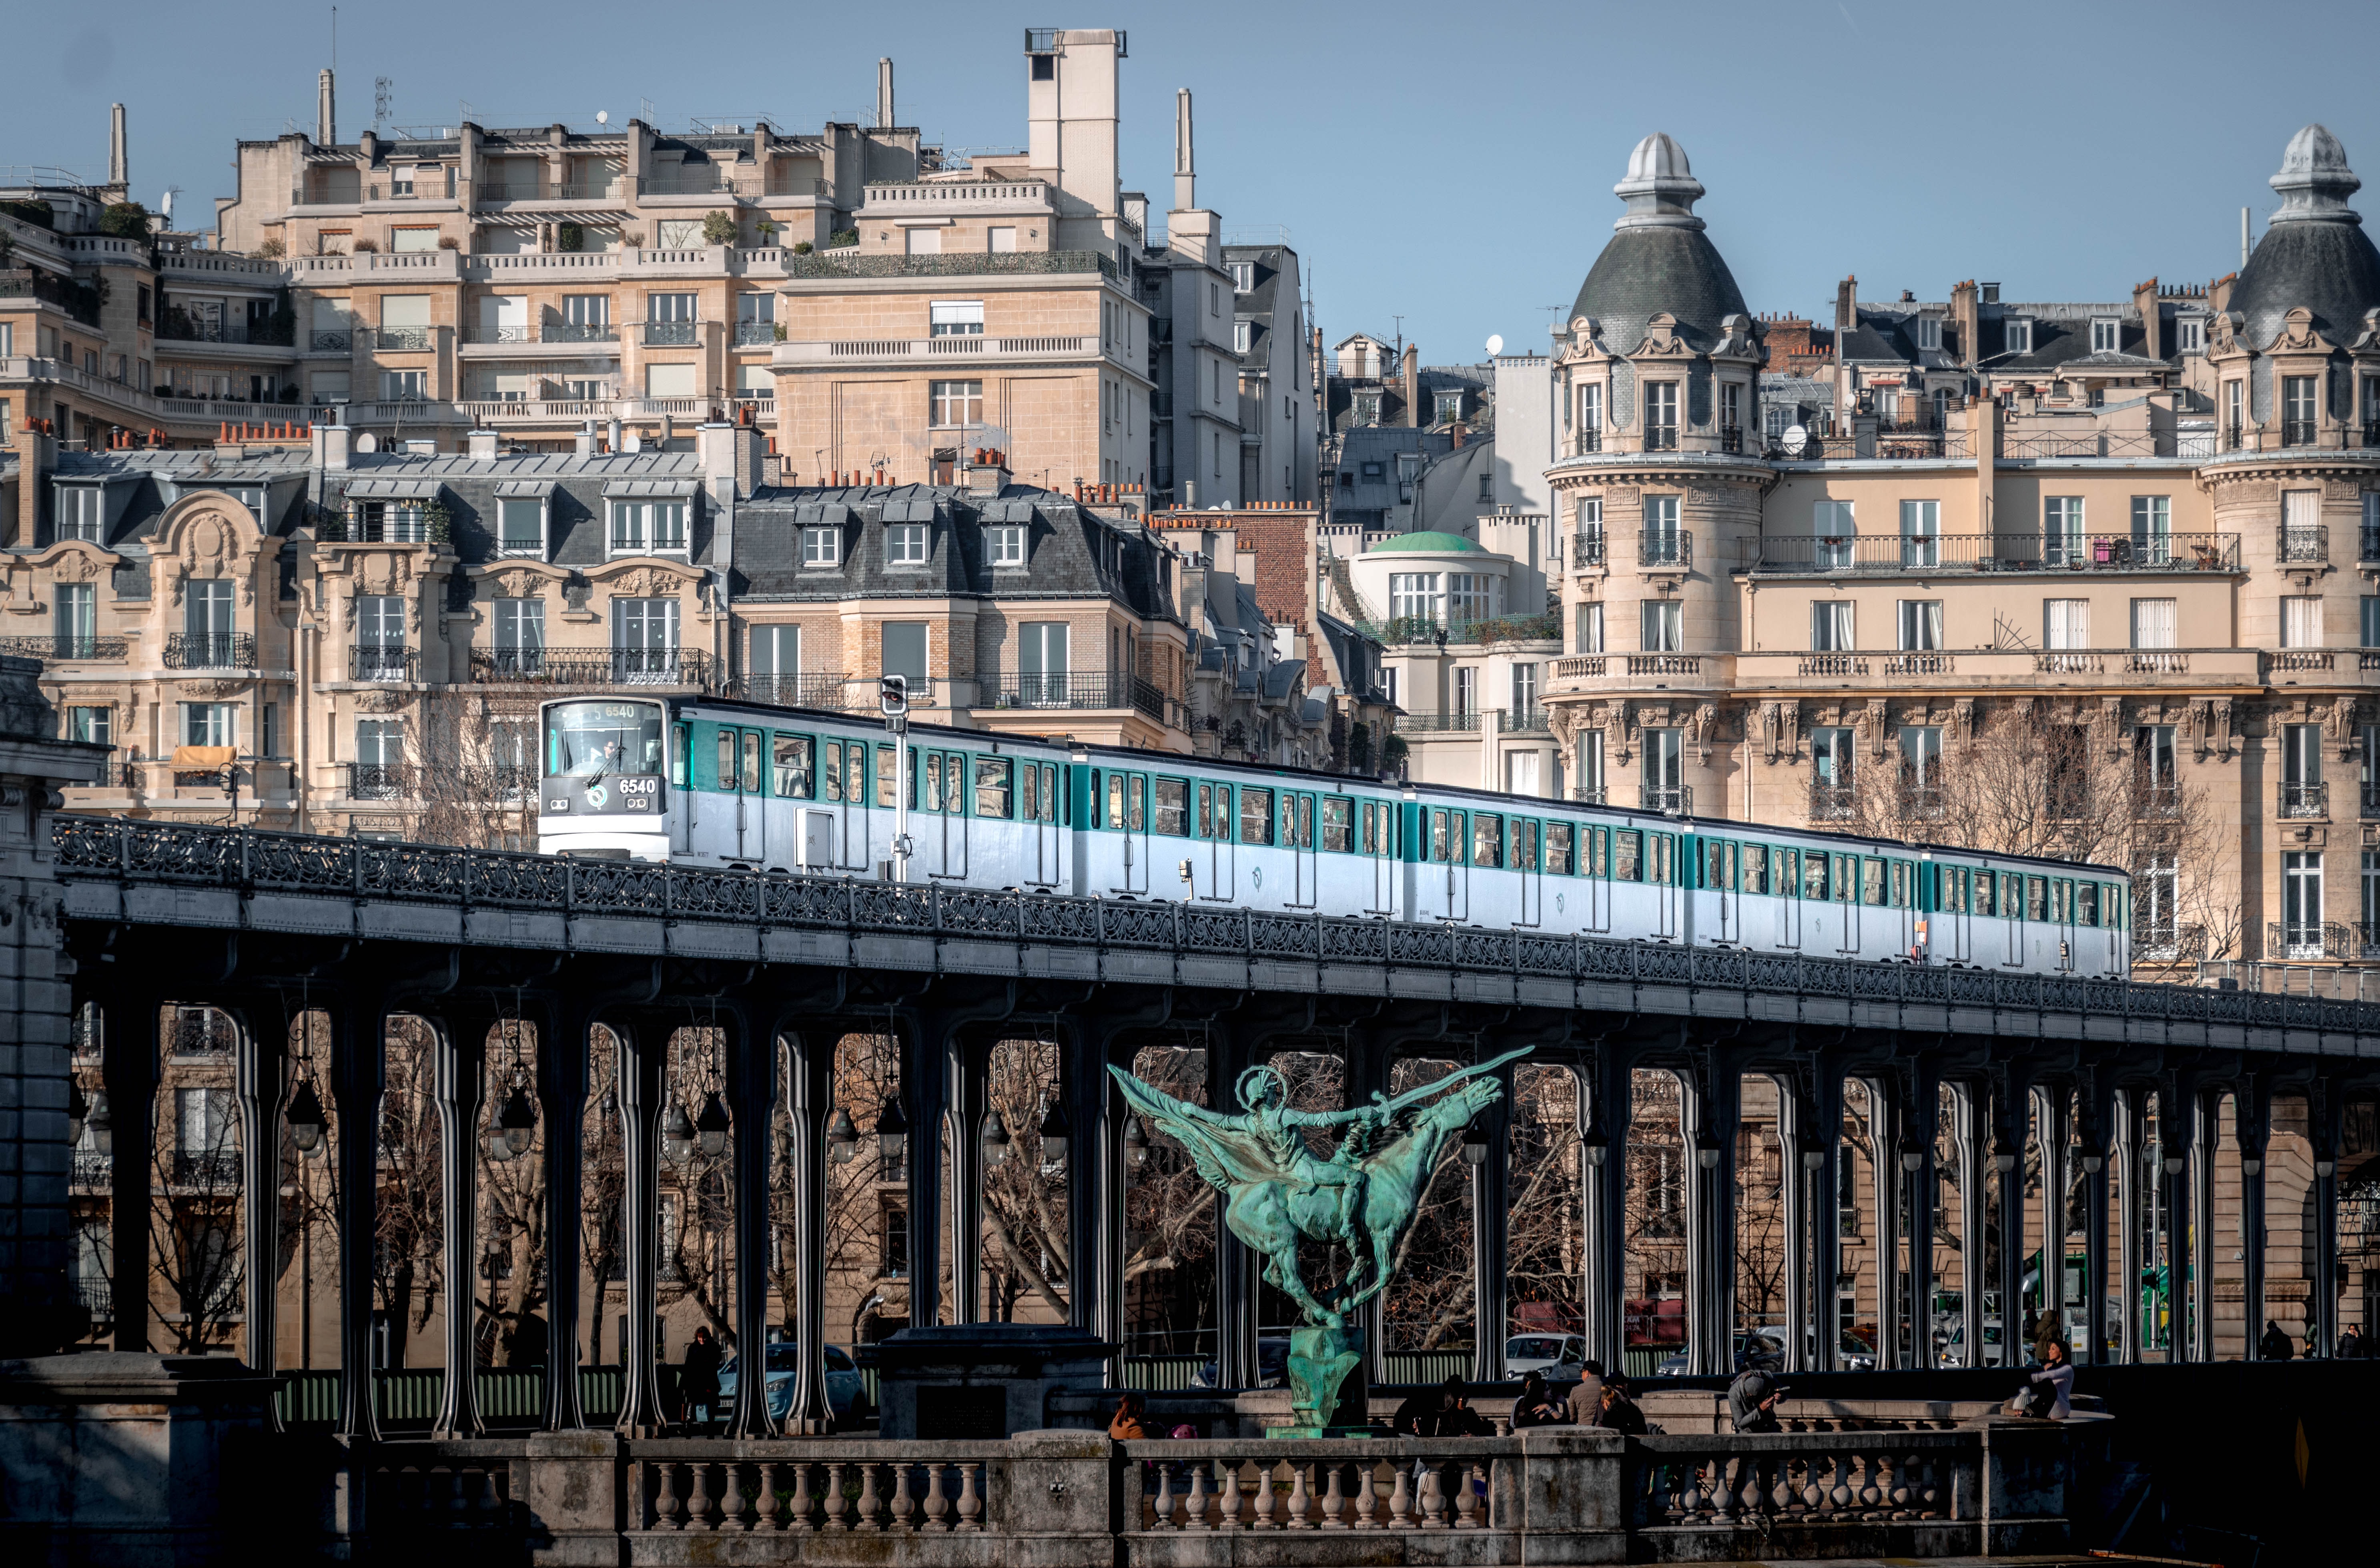 Metro on a bridge with Parisian buildings in the background